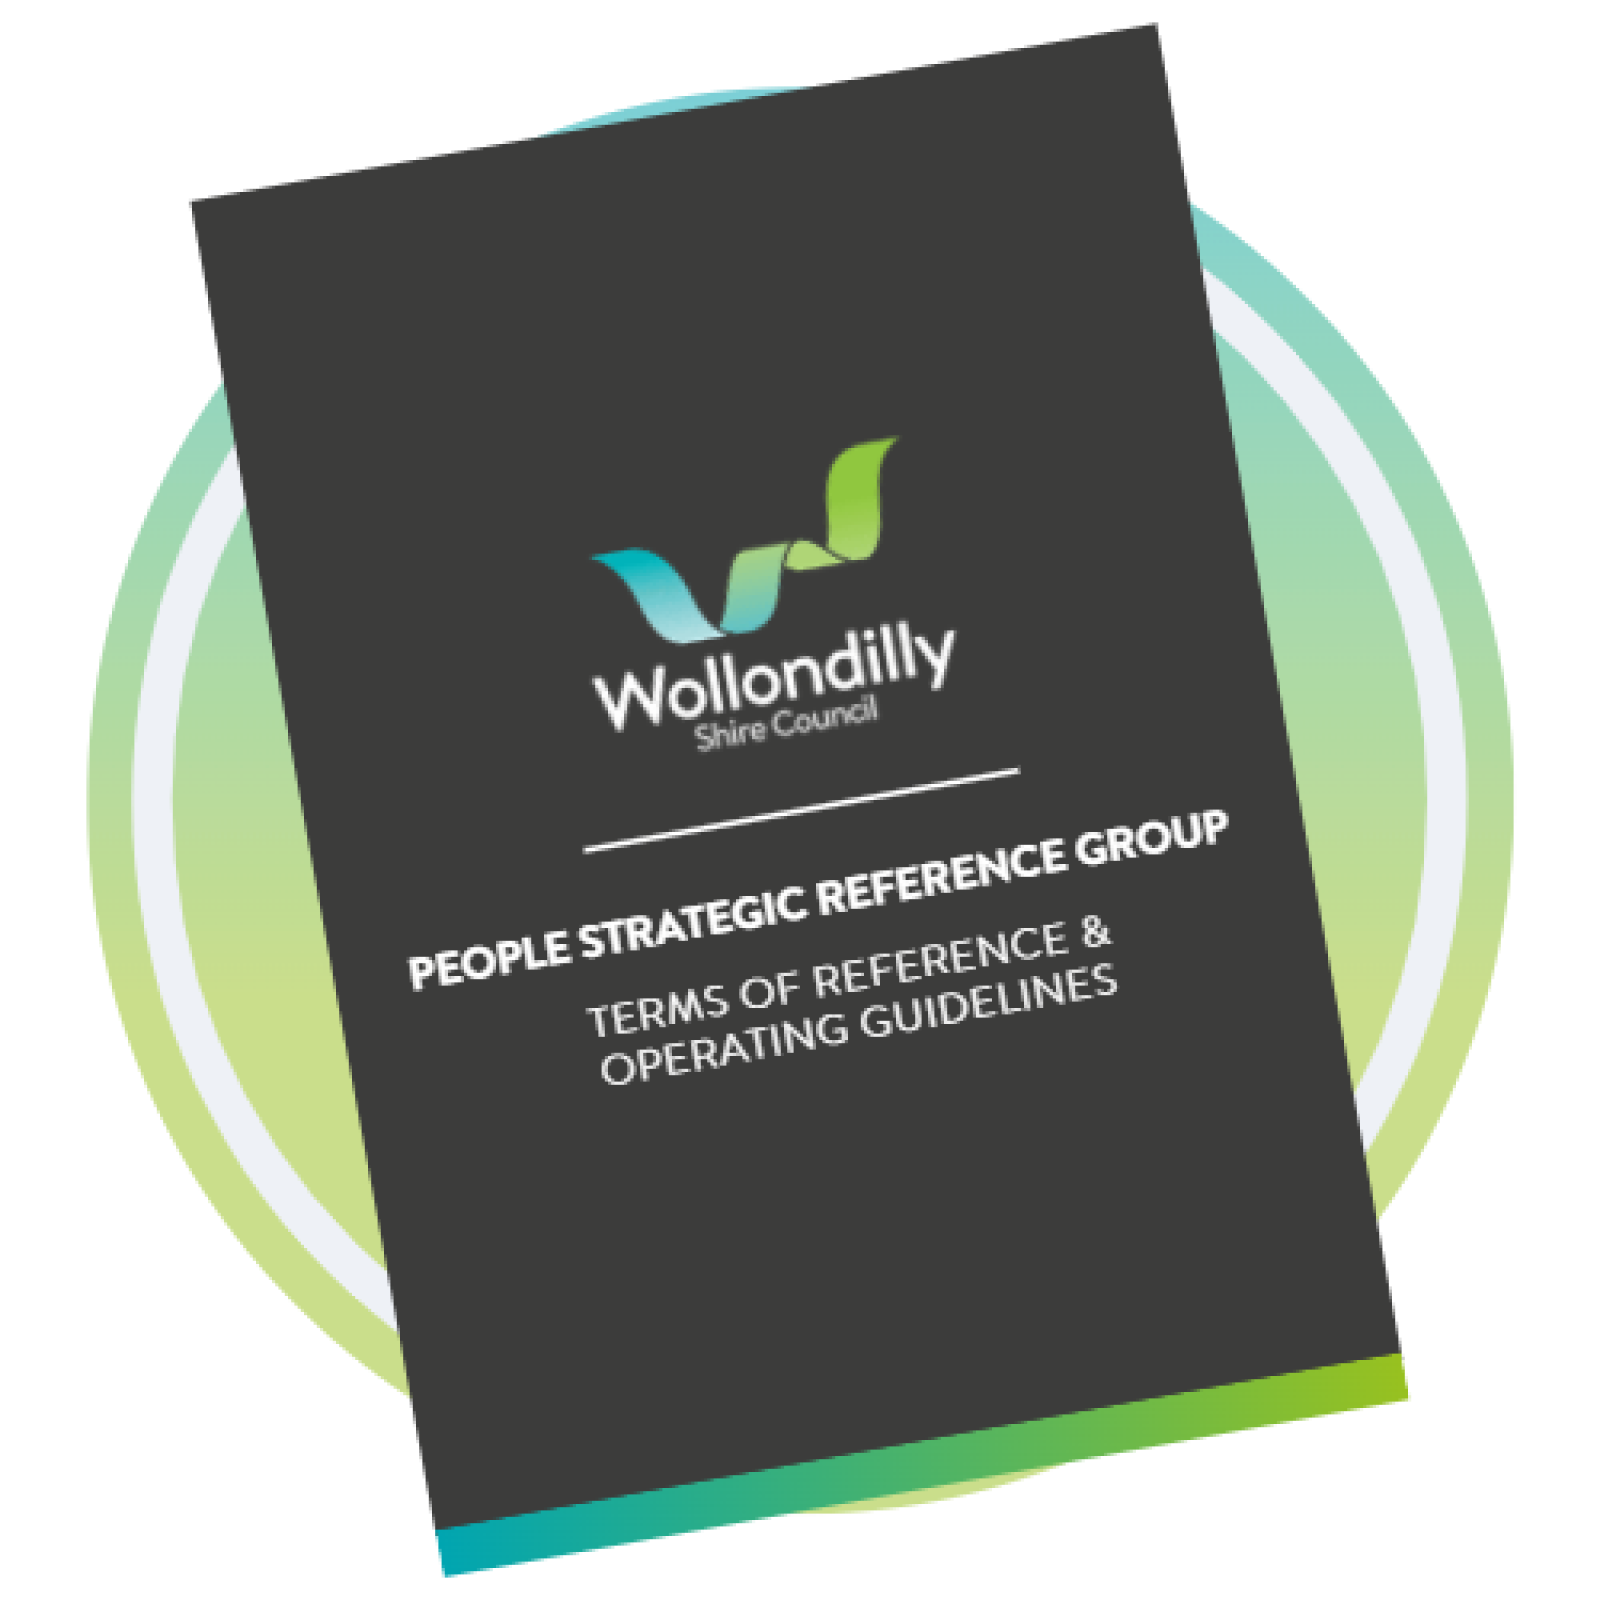 People Strategic Reference Group Terms of Reference Operating Guidelines Document Lockup